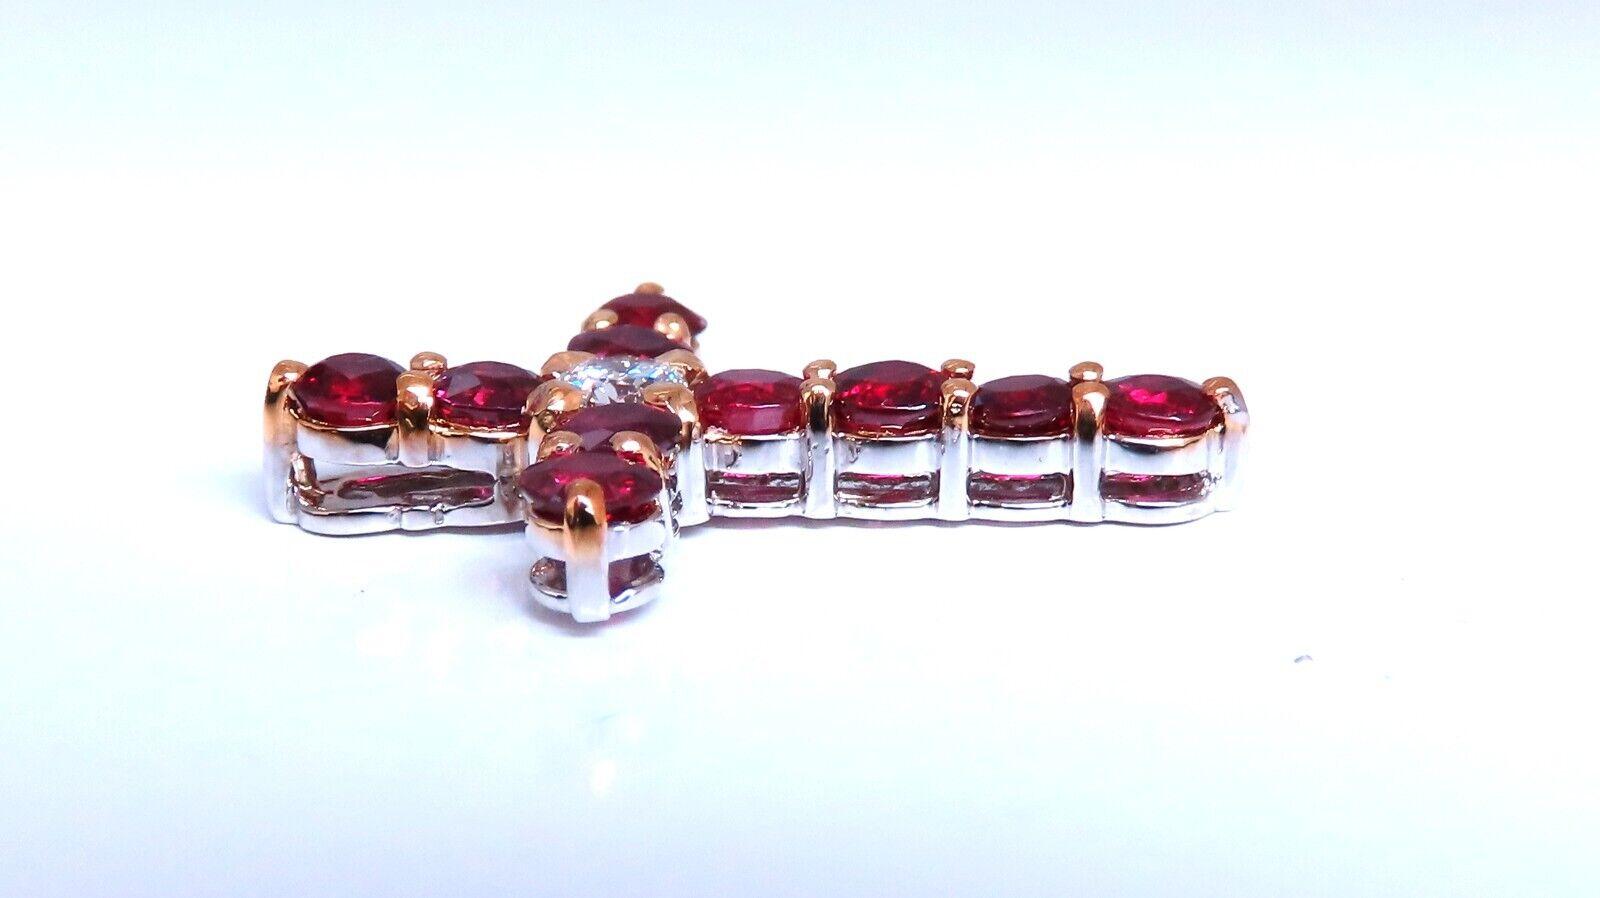 Natural Round Rubies & Diamond Cross.

.30ct. Brilliant Round Cut Diamond

Natural & Untreated

Vs-2 clarity.

Natural 3.85ct Rubies

Brilliant rounds, full cuts

clean clarity & transparent

Cross: 31 x 23mm

15 inches long necklace

total weight: